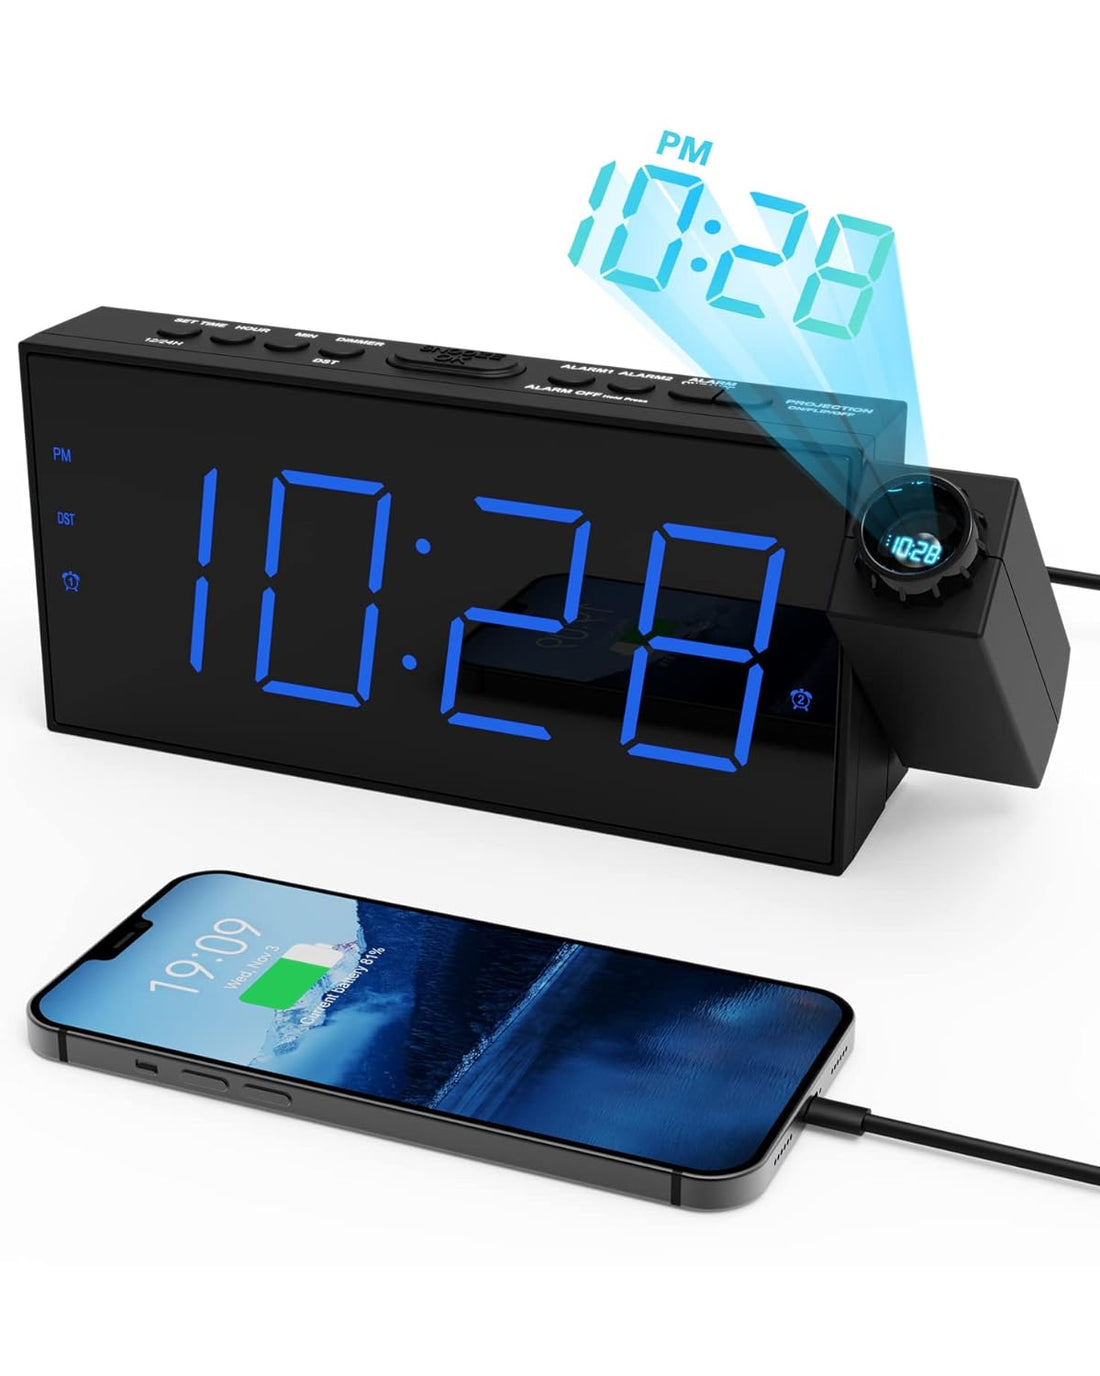 Projection Alarm Clock for Bedroom,LED Digital Clock Projection on Ceiling Wall with USB Phone Charging,Battery Backup,180°Projector& Dimmer,12/24H,DST,Snooze,Dual Loud Bedside Clock for Heavy Sleeper